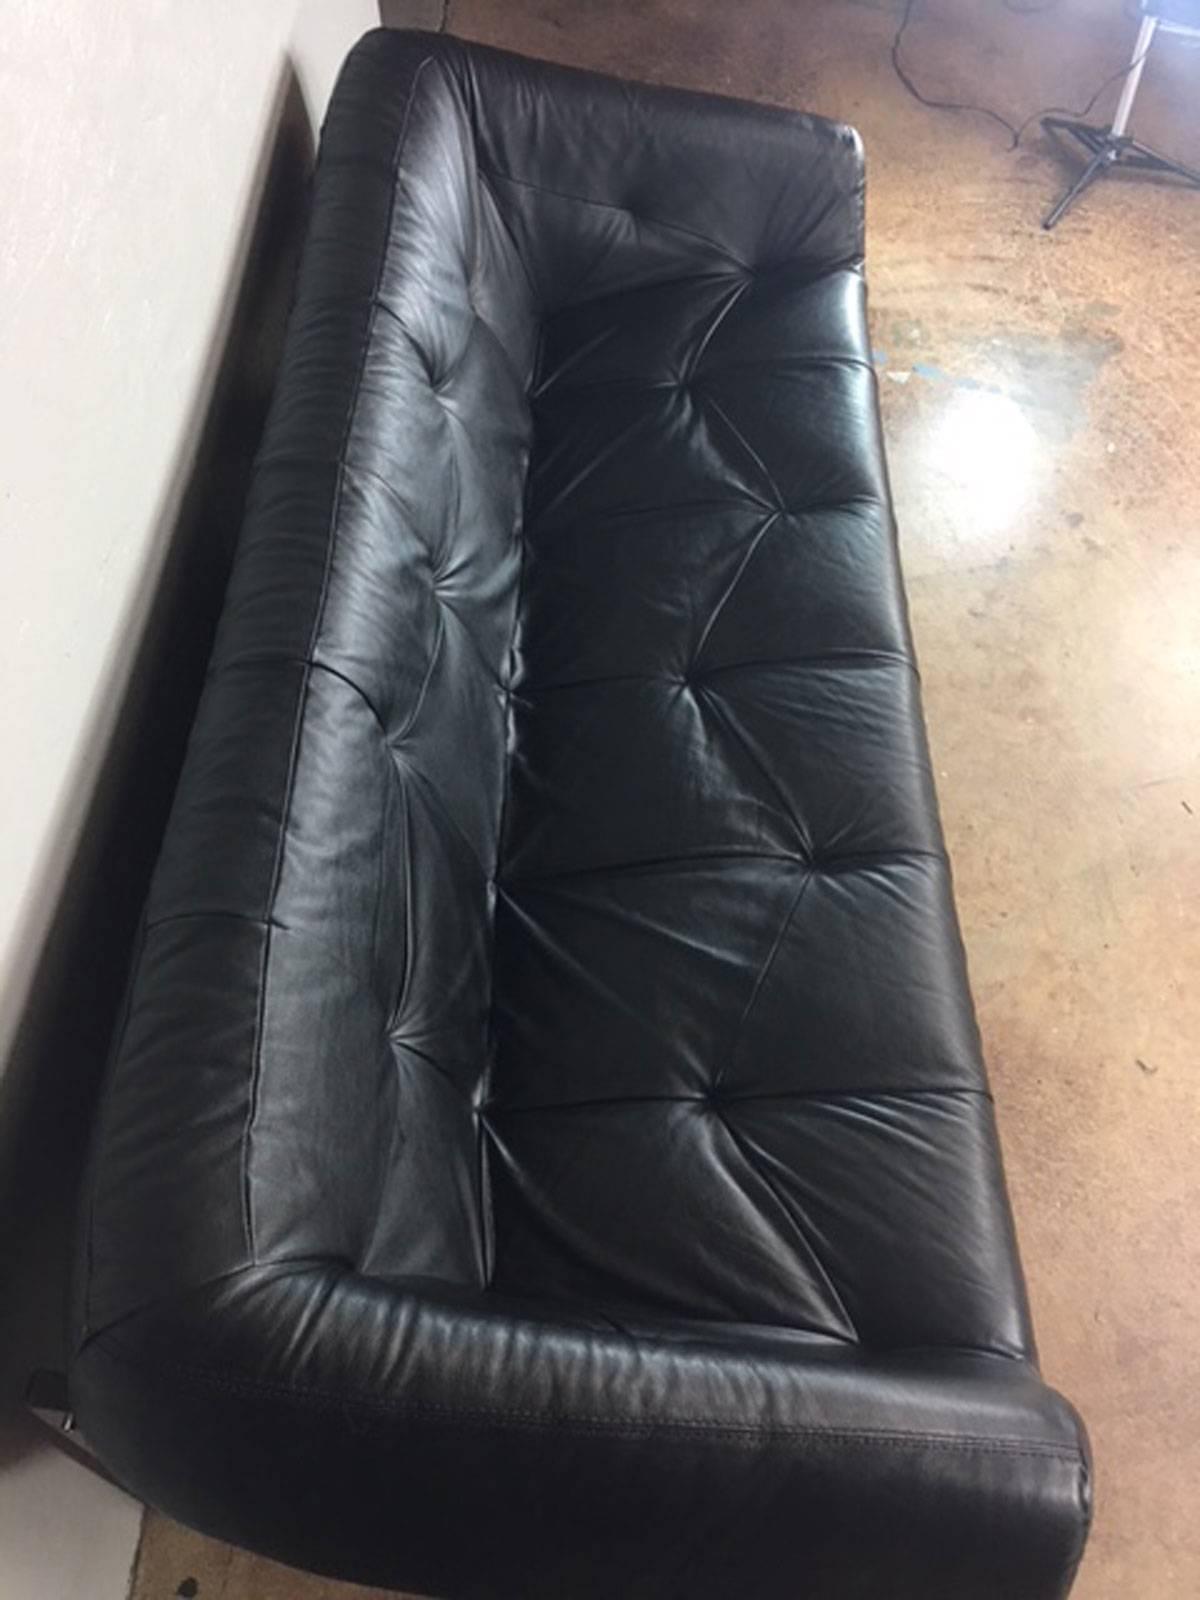 Central American Percival Lafer Leather Sofa For Sale